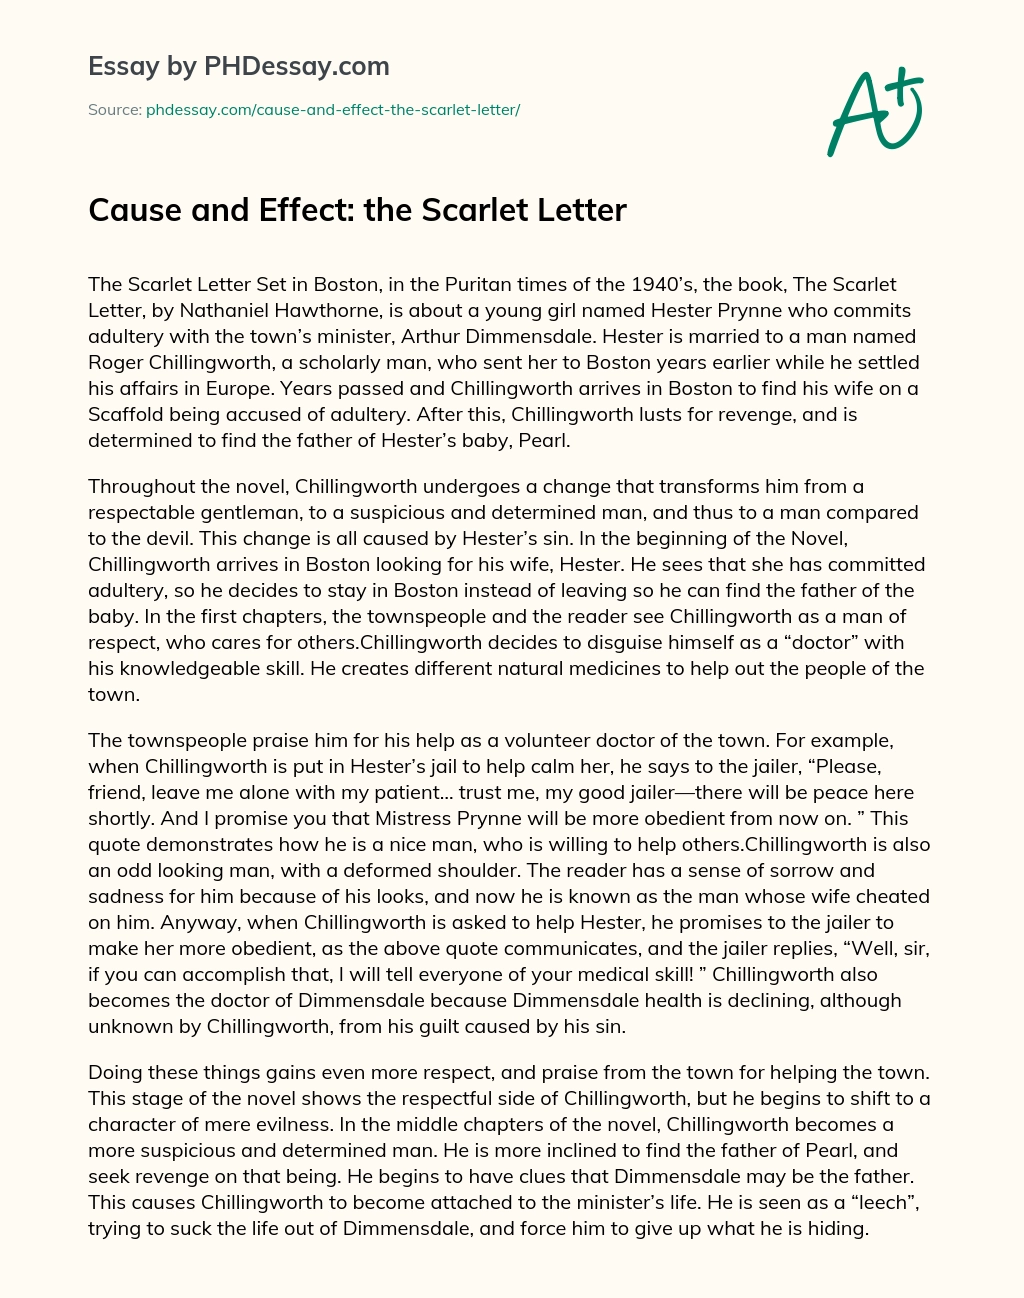 Cause and Effect: the Scarlet Letter essay